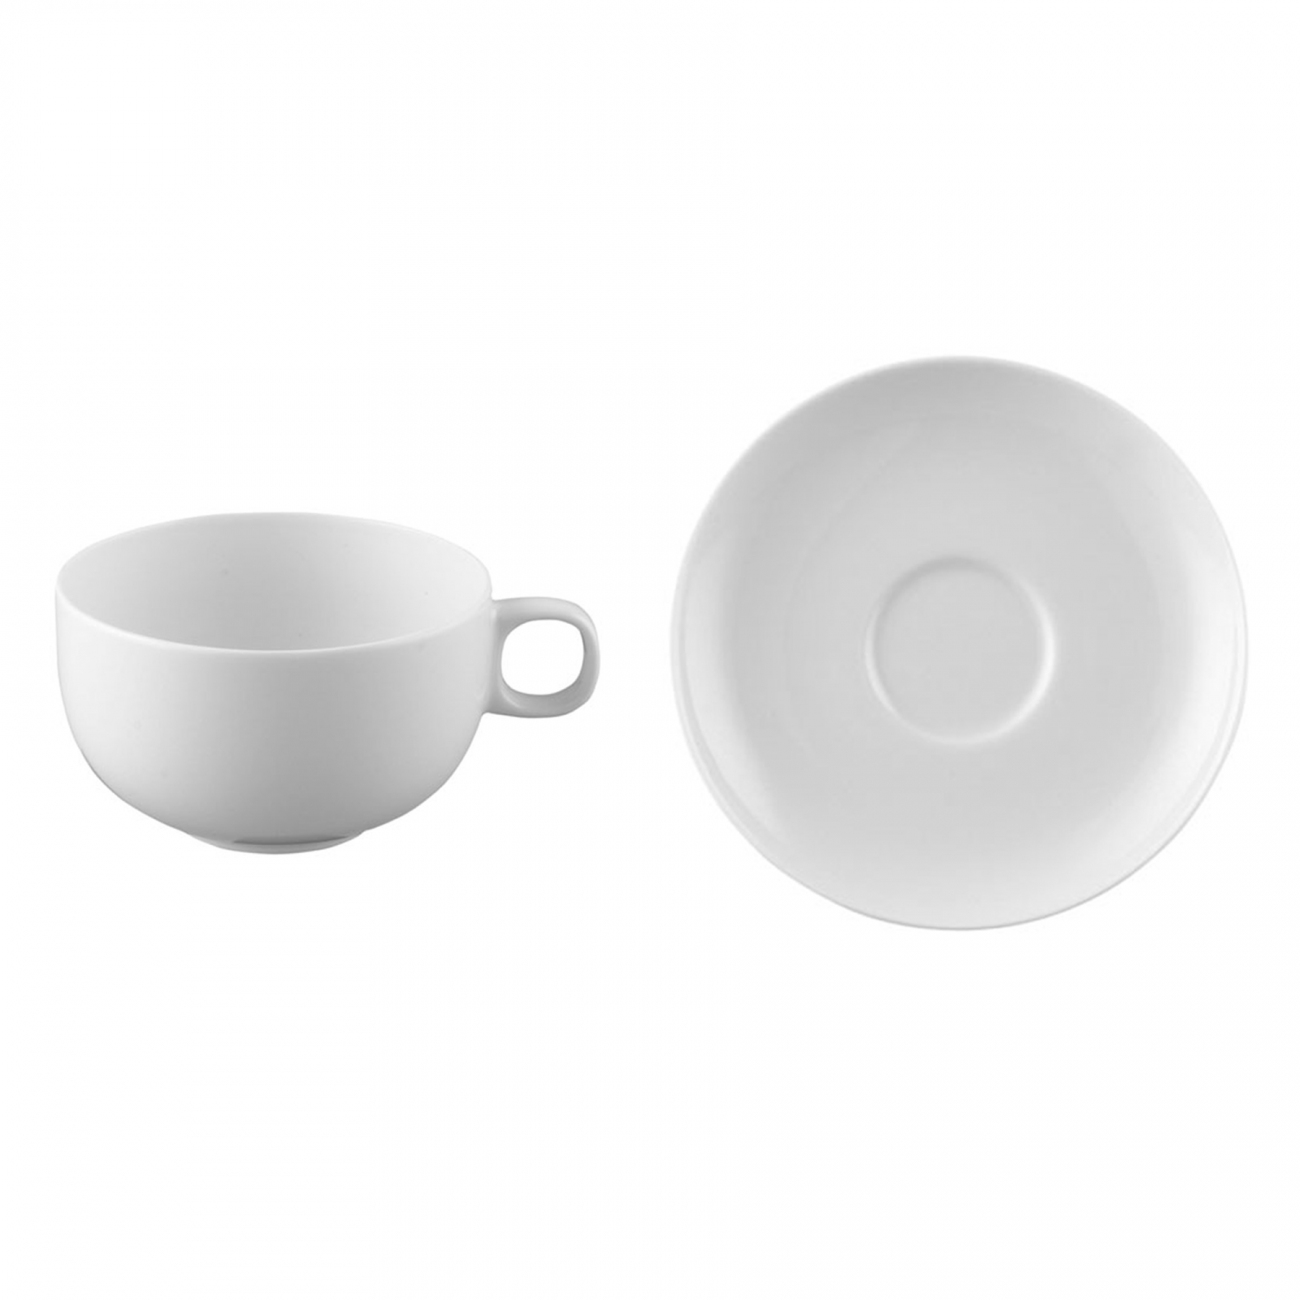 Rosenthal MOON Weiss Tea Cup with Saucer